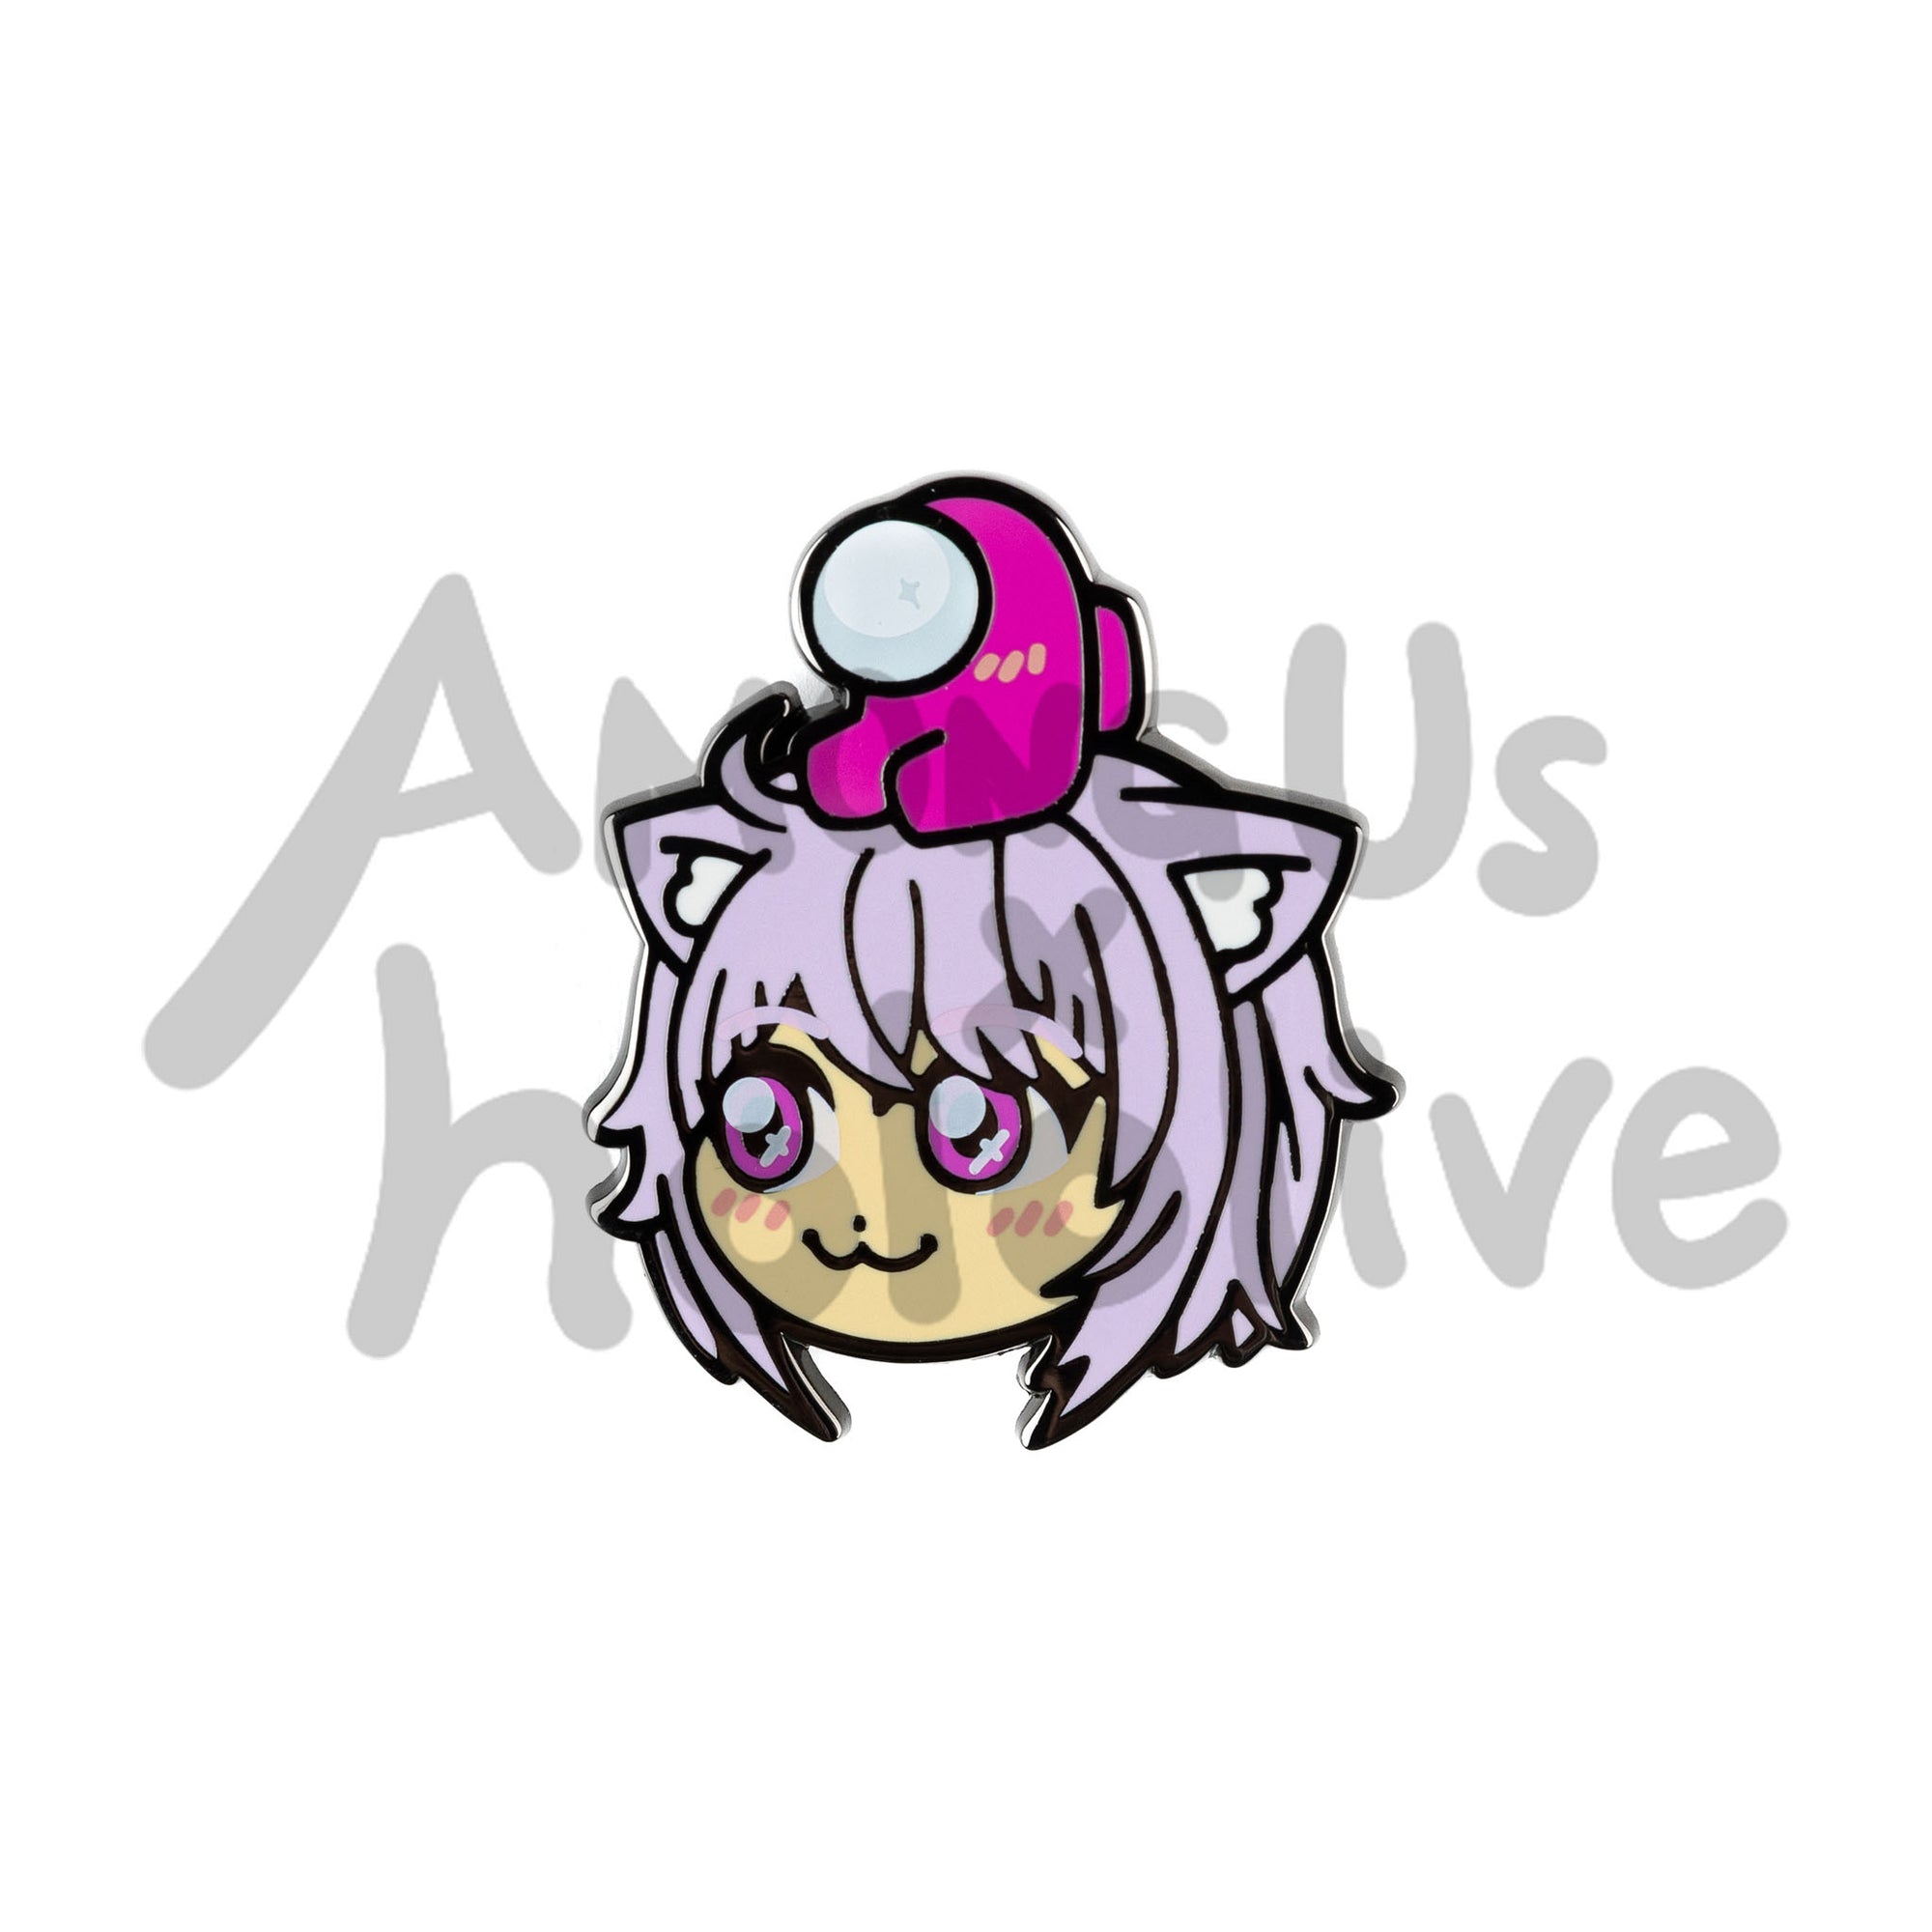 Enamel Pin of Nekomata Okayu's Face from Hololive. Okayu has fair skin, magenta sparkly eyes, and pastel purple bobbed hair with matching purple cat ears. There's a Pink Crewmate sitting atop her head. Both characters have pink blush marks on their faces.